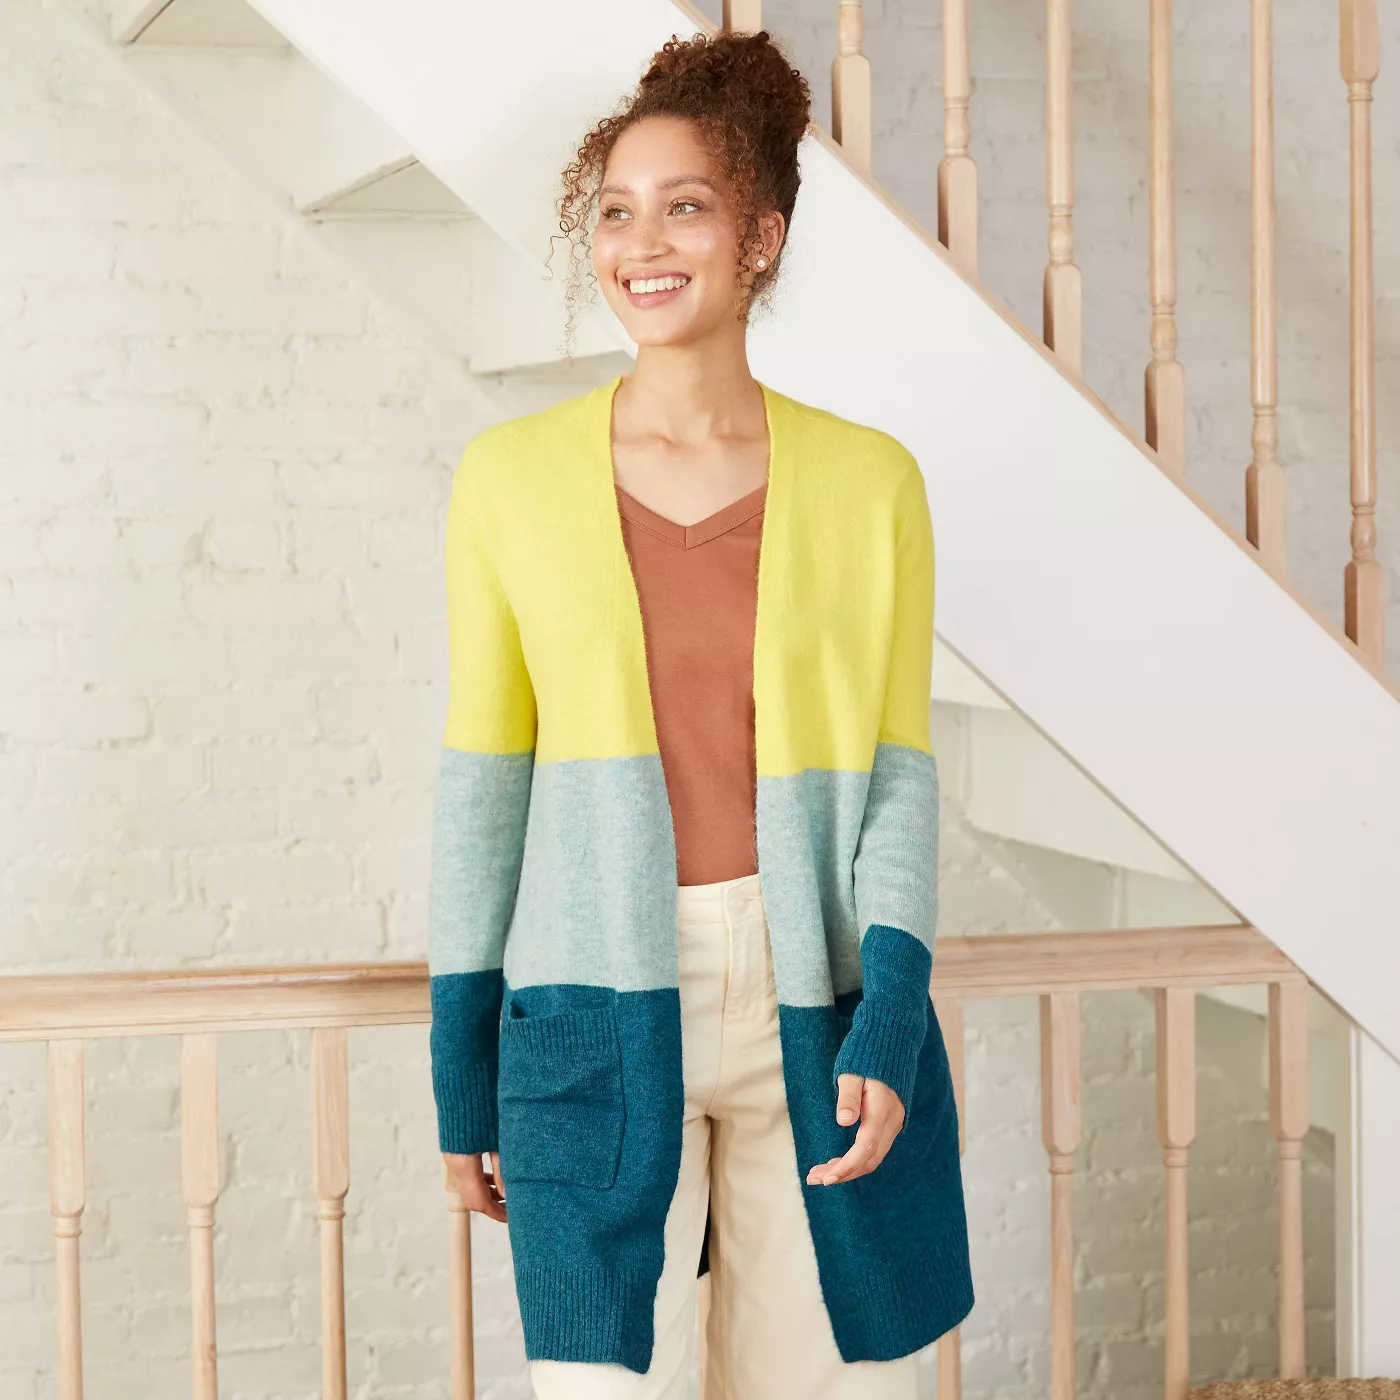 Women's Colorblock Open-Front Cozy Cardigan - A New Day™  - image 1 of 14